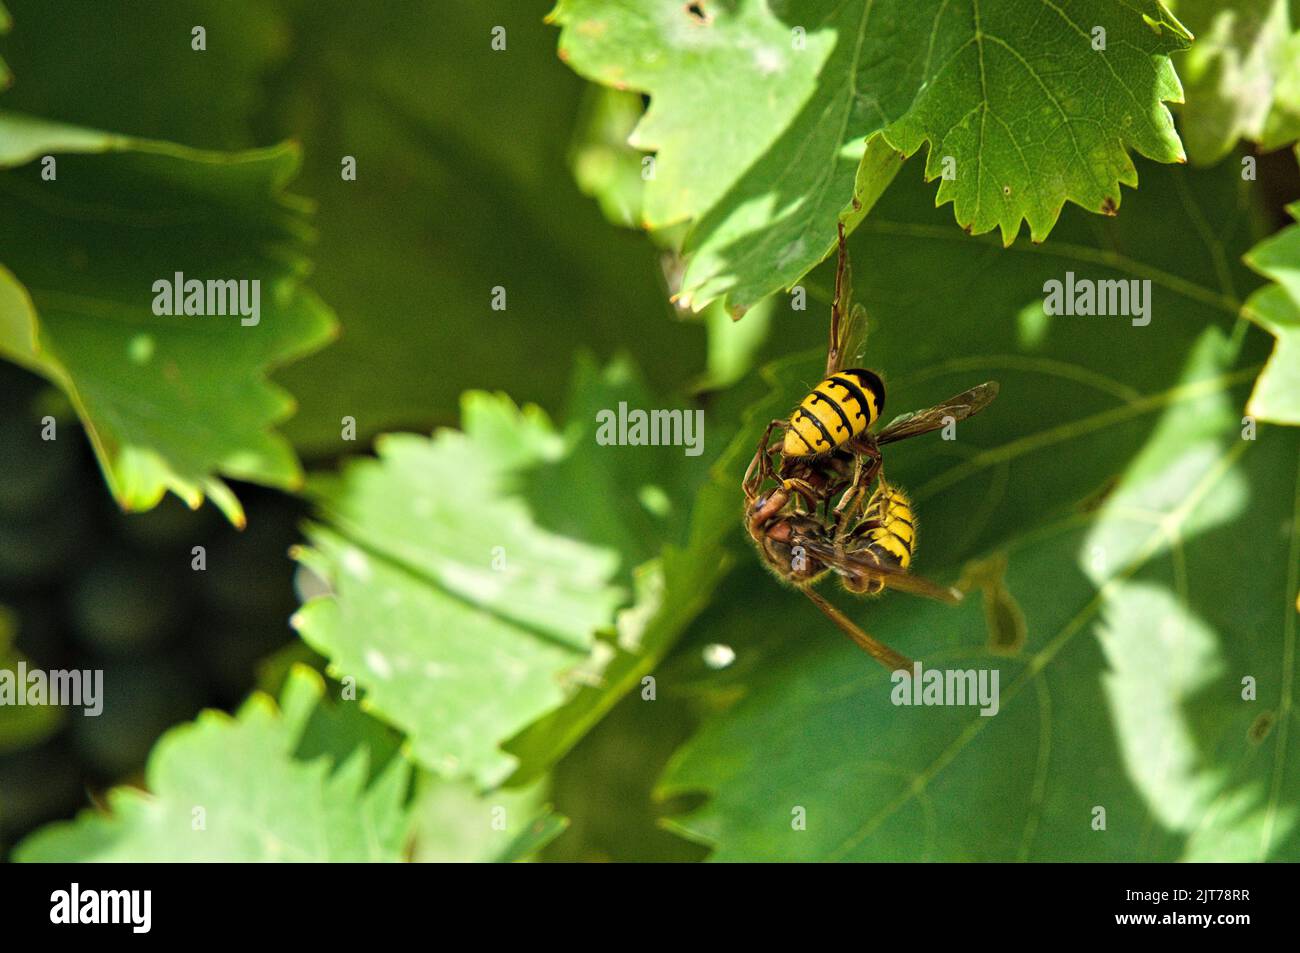 Two hornets in comment fighting before vine leaves Stock Photo